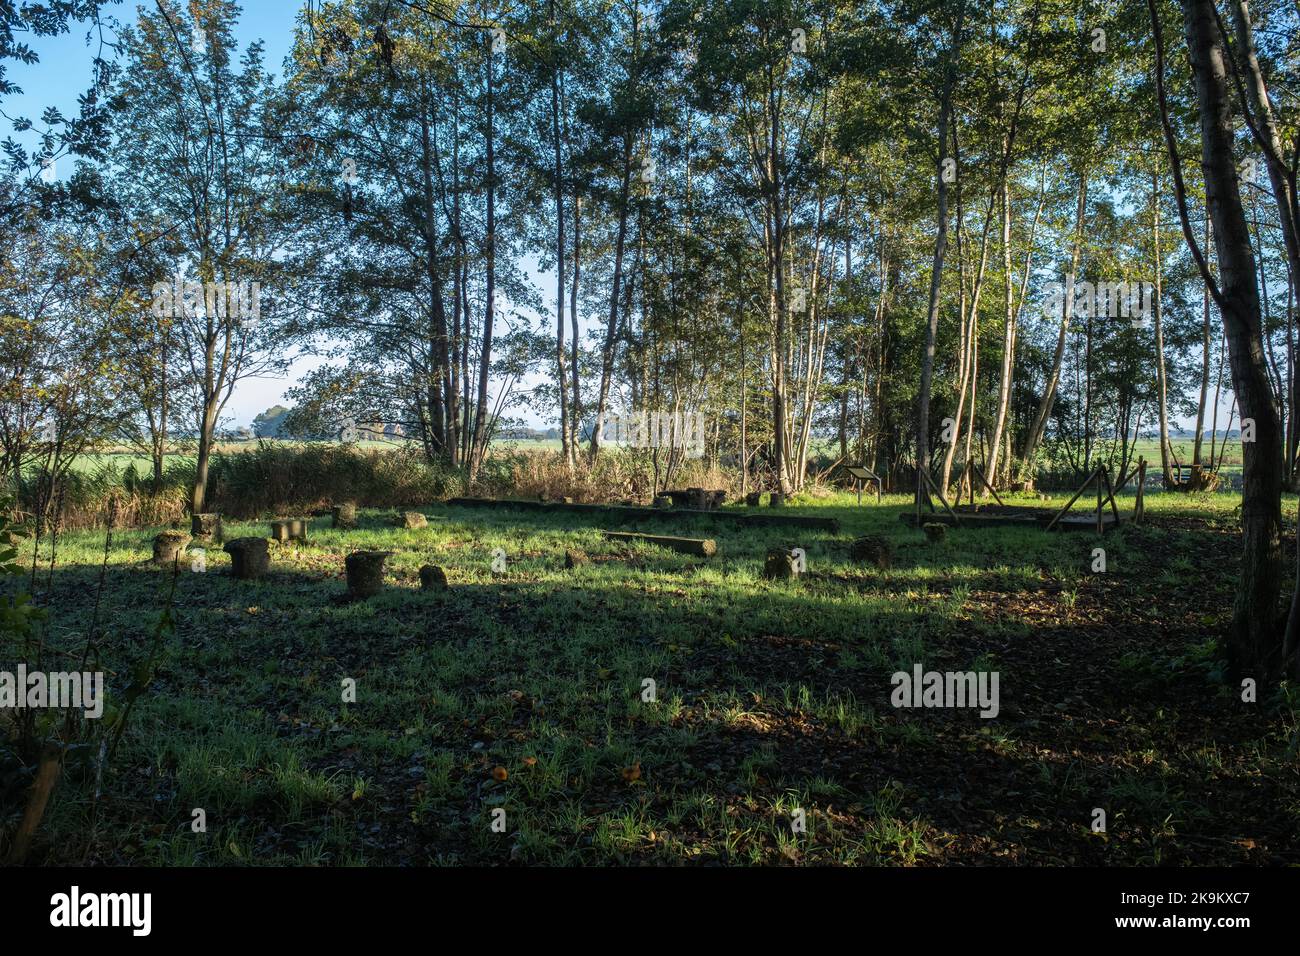 Blesdijke, Netherlands - Oct 18, 2022: It Petgat labour camp was located on the Nijksweg in Blesdijke and was used as a prison camp for Jewish interne Stock Photo